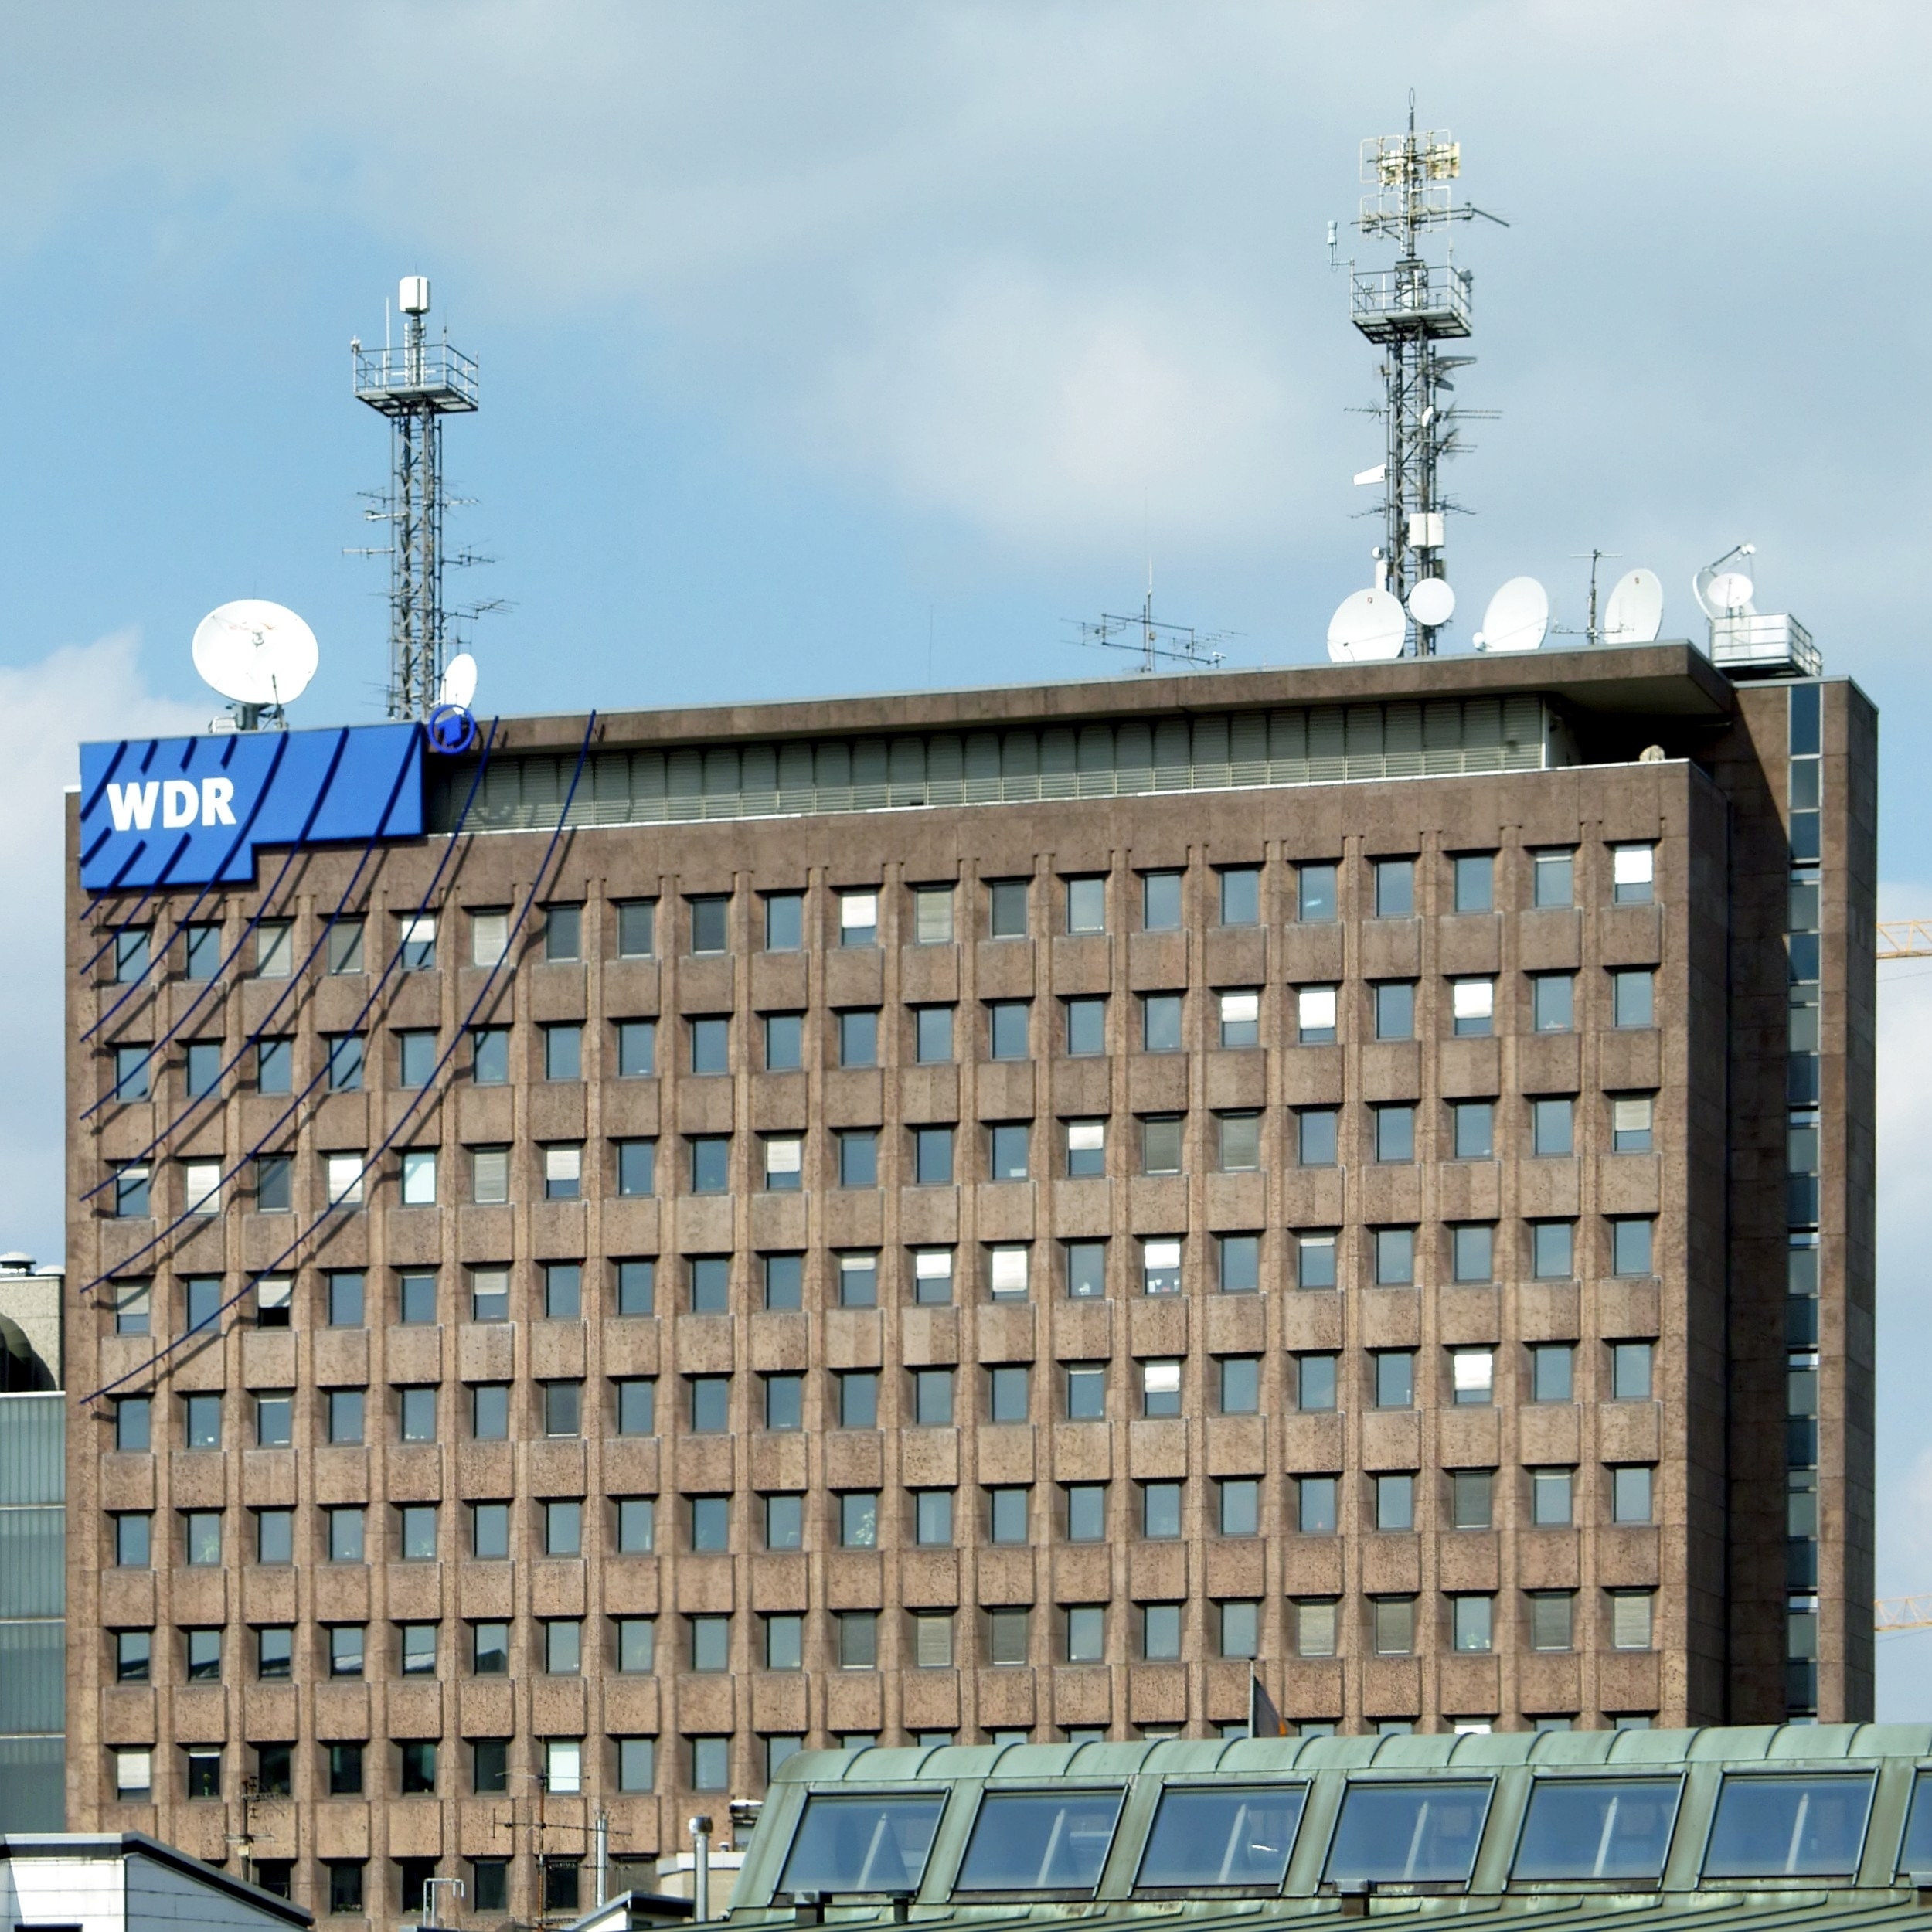 One of WDR's buildings in Cologne